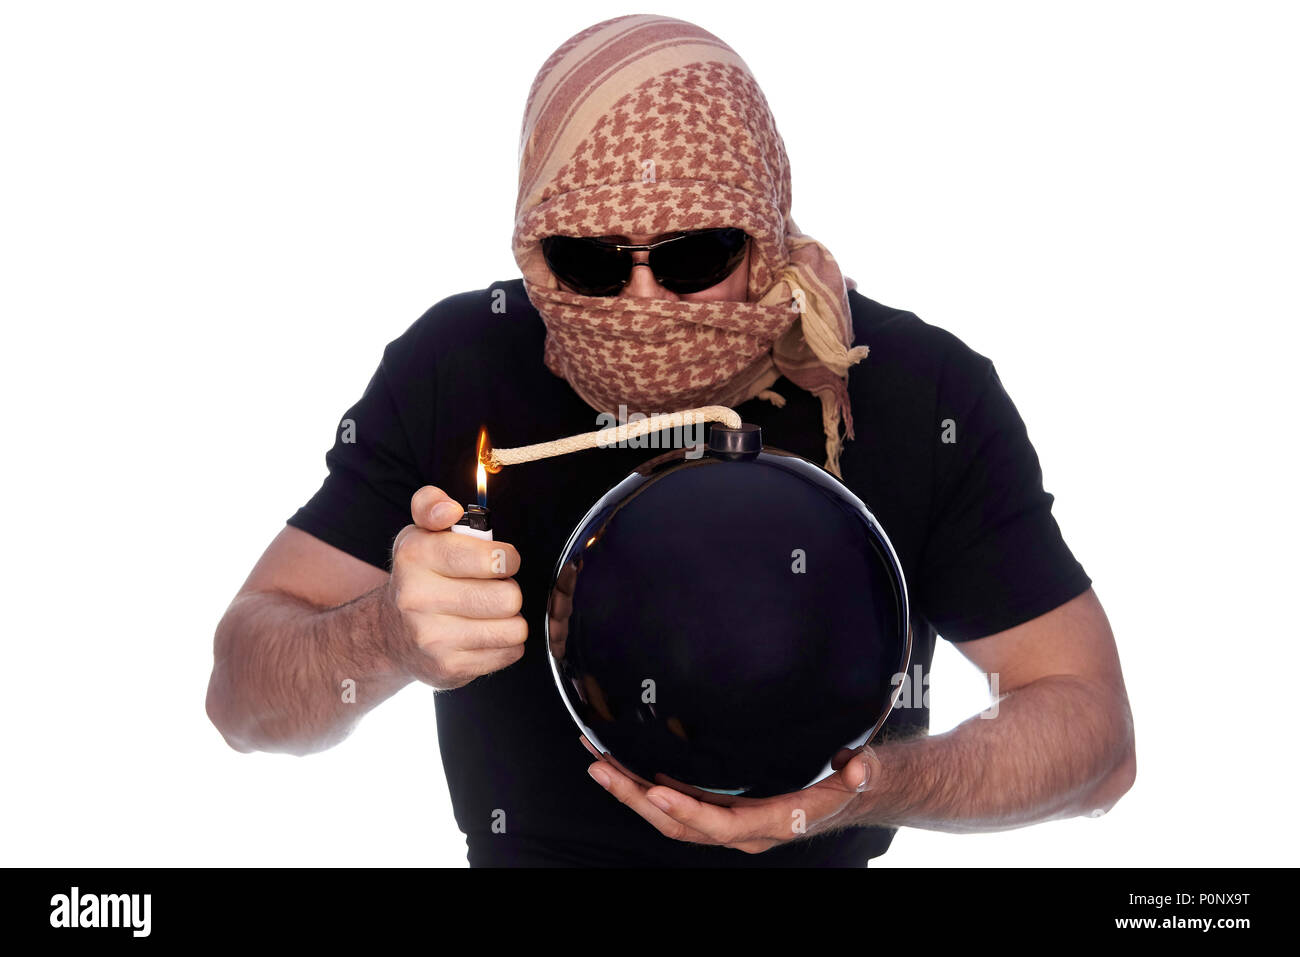 A man hidden under the arafatka and black glasses ignites a bomb on a white background. The concept of terrorism. Stock Photo